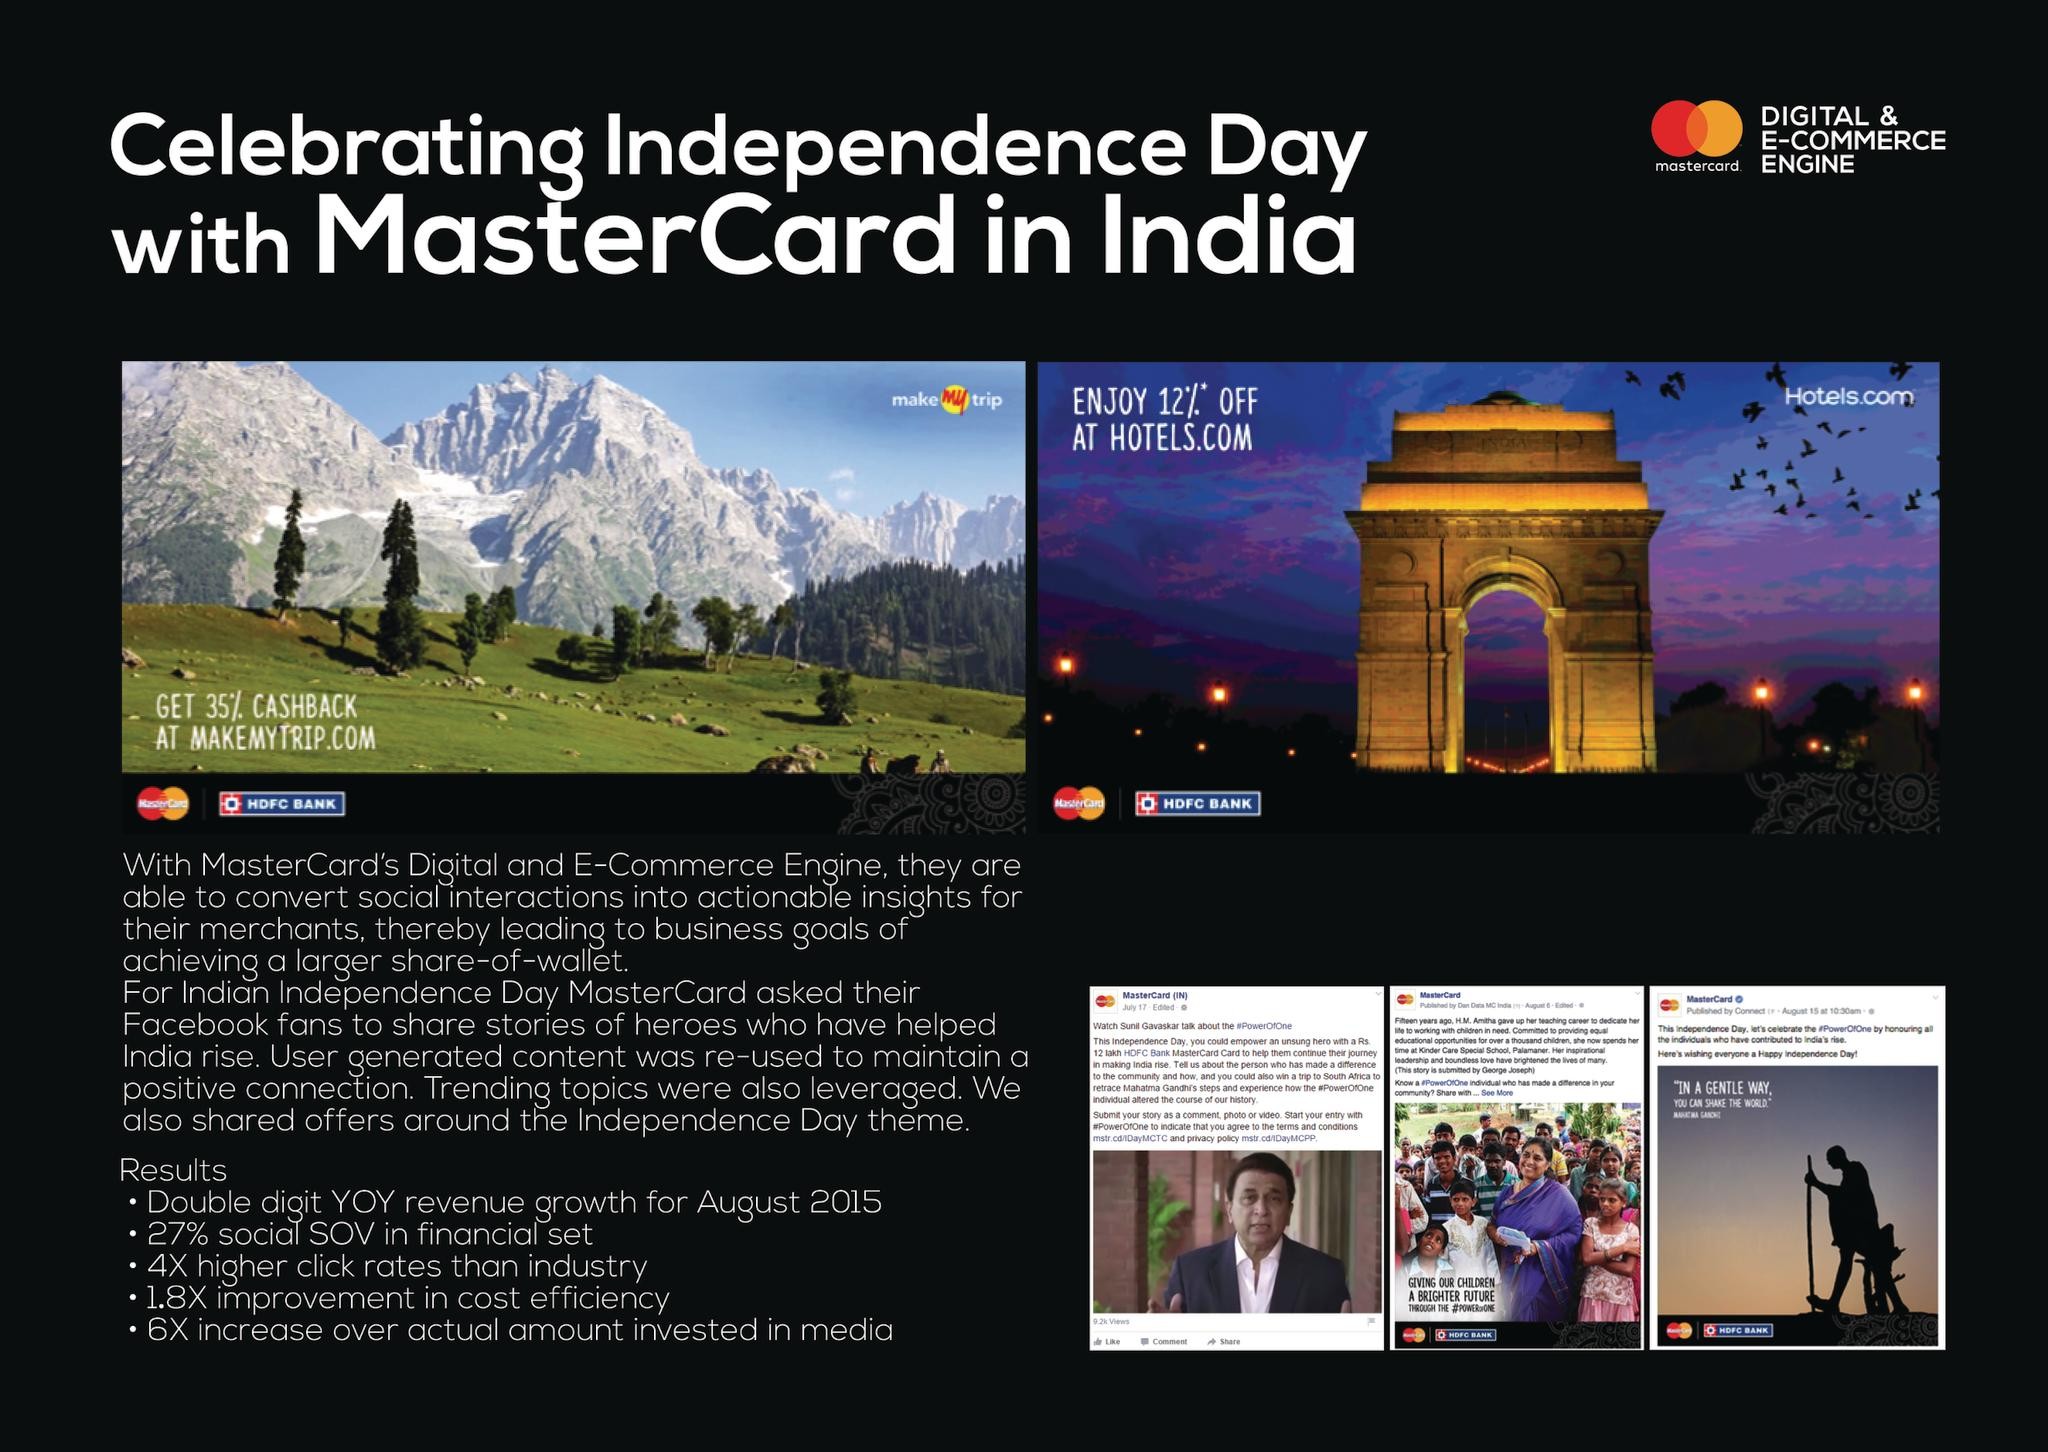 HDFC Bank and MasterCard Independence Day Campaign 2015